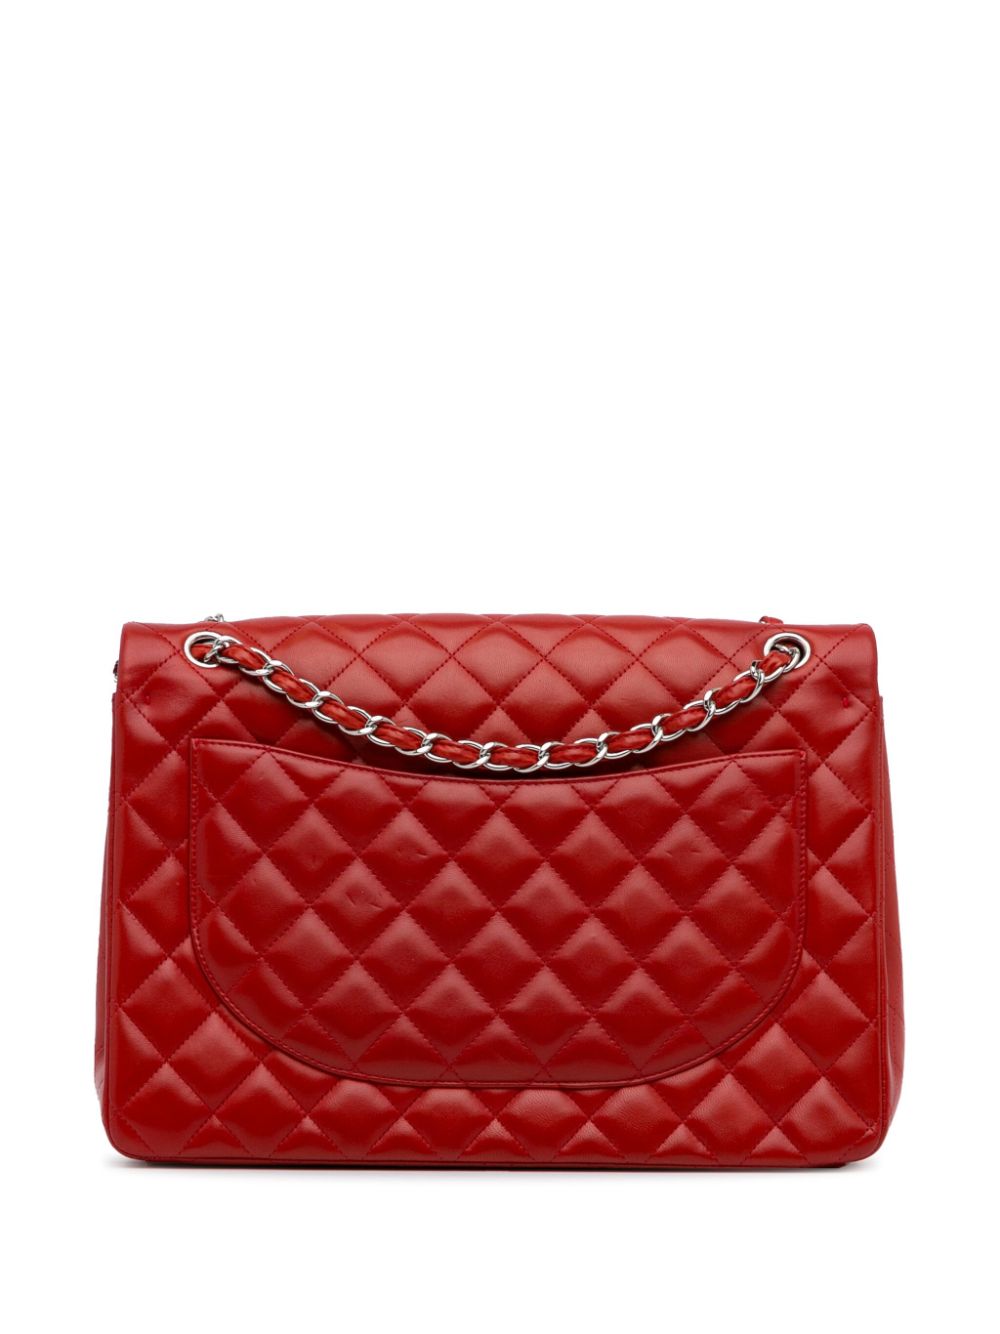 CHANEL Pre-Owned 2011 Double Flap schoudertas - Rood